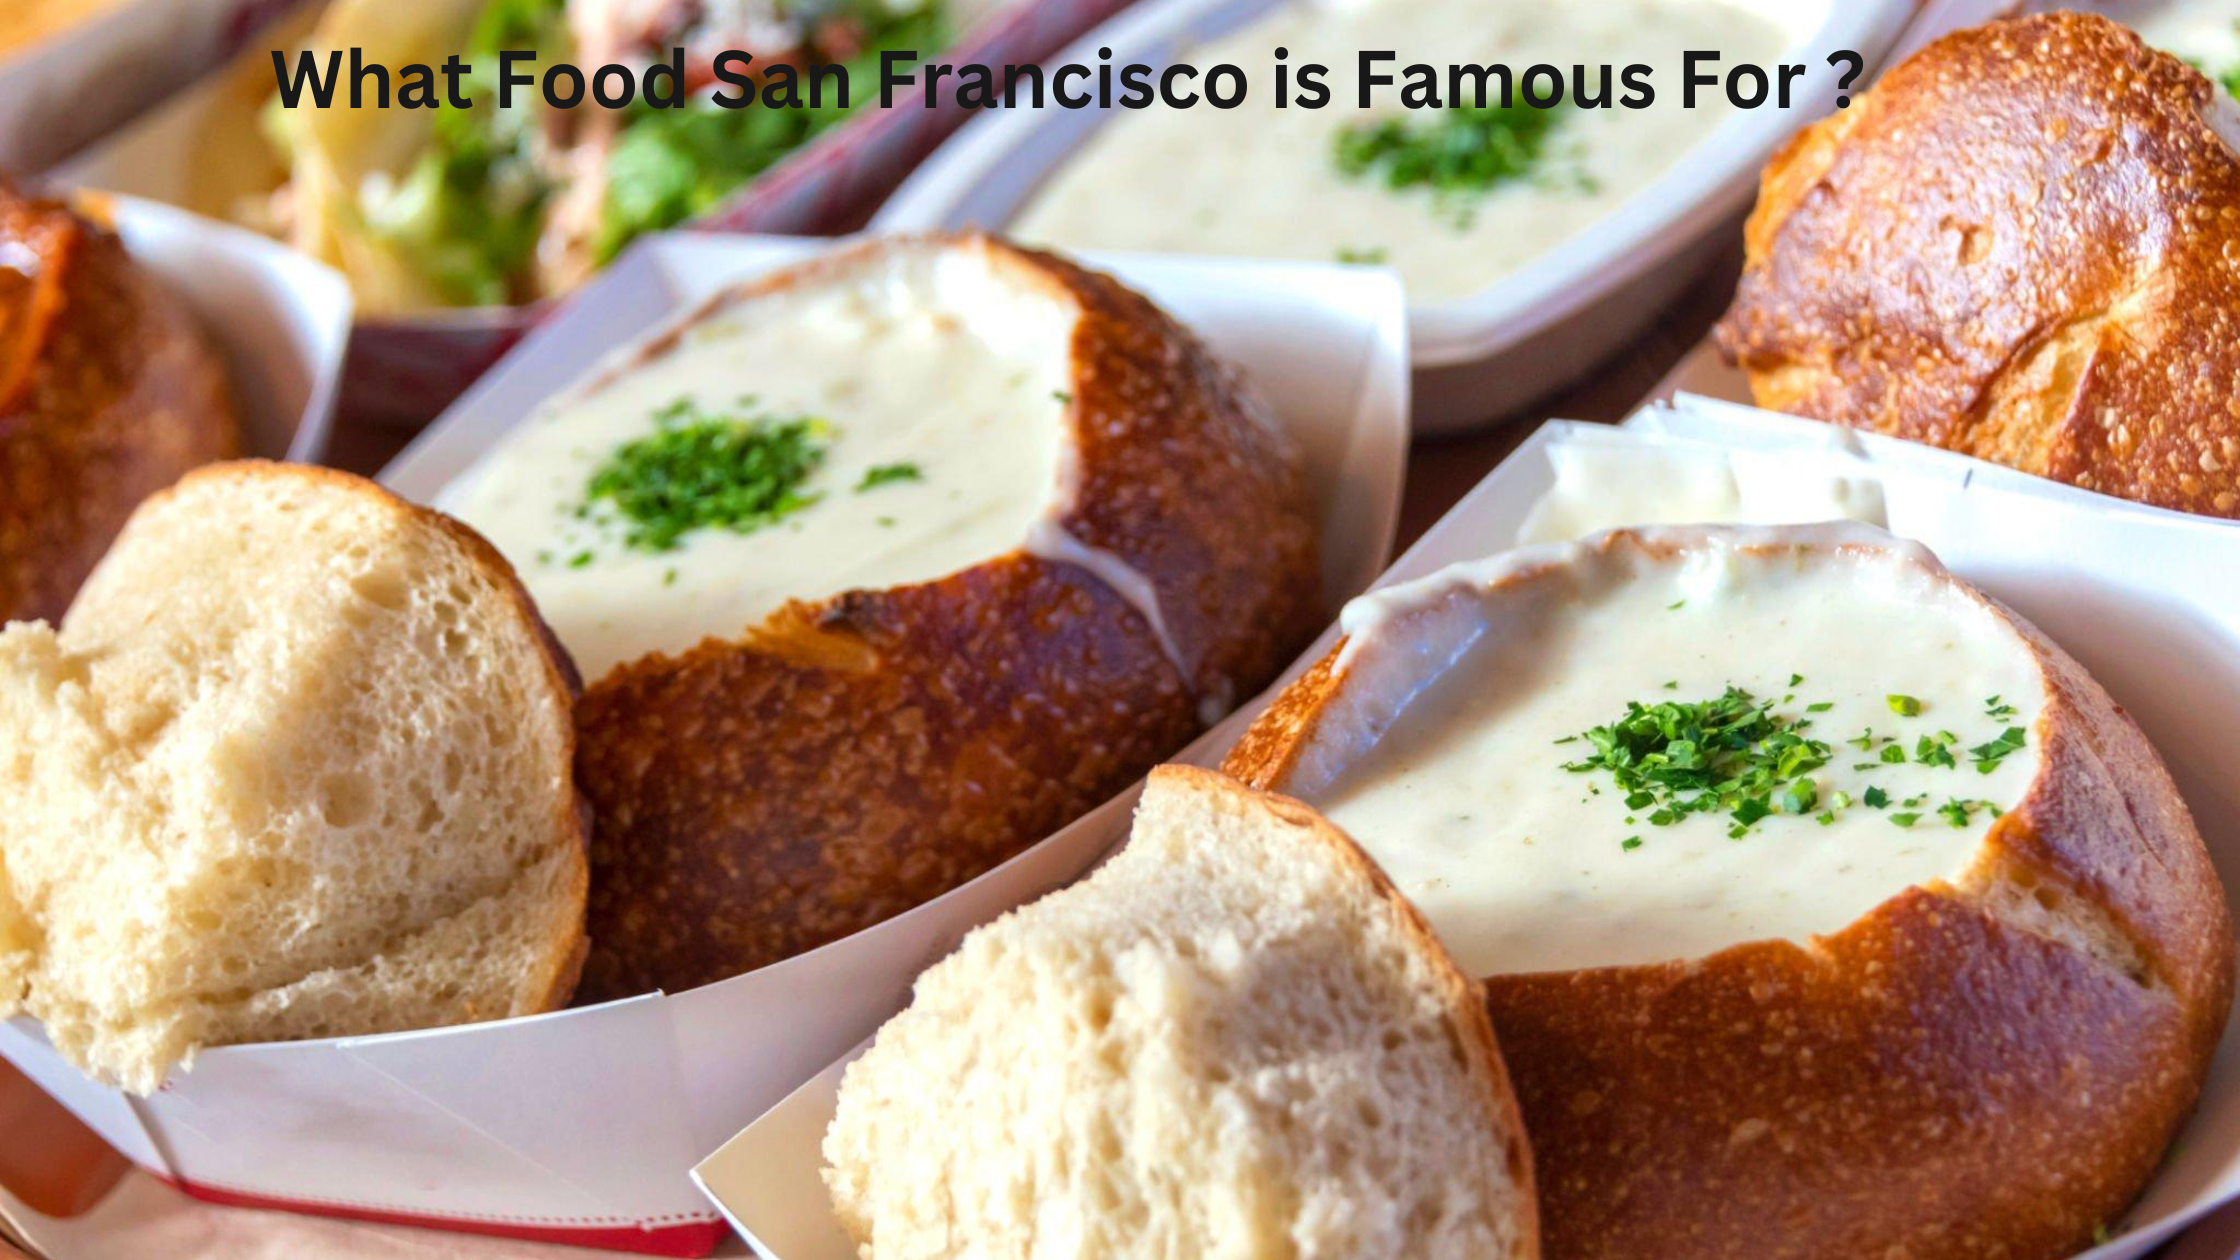 What Food San Francisco is Famous For